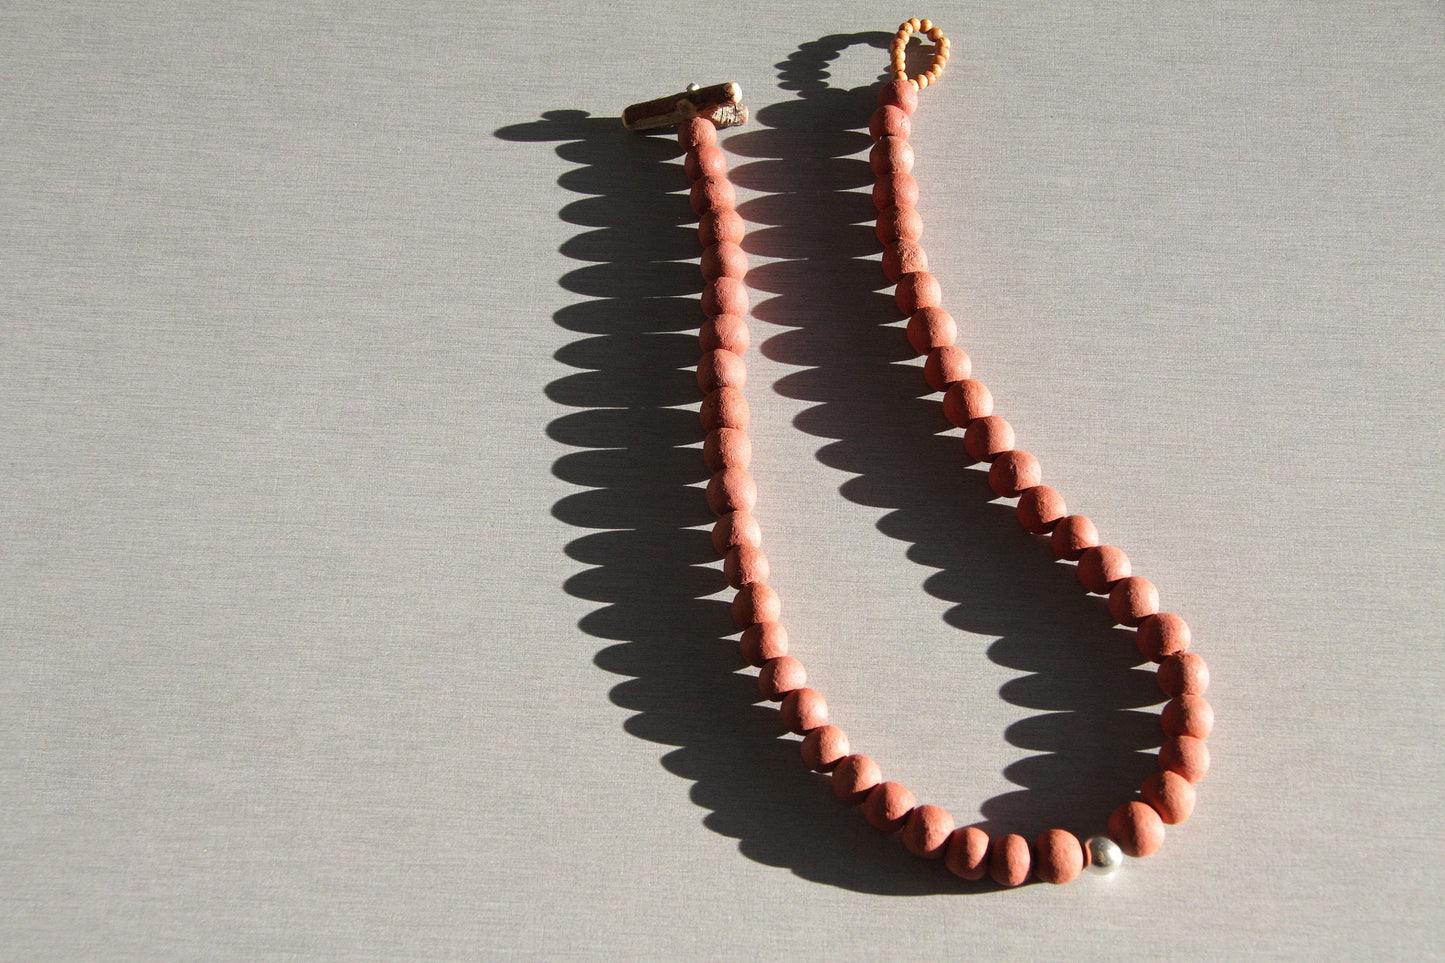 I am - ceramic necklace with a single sterling silver bead - made to order